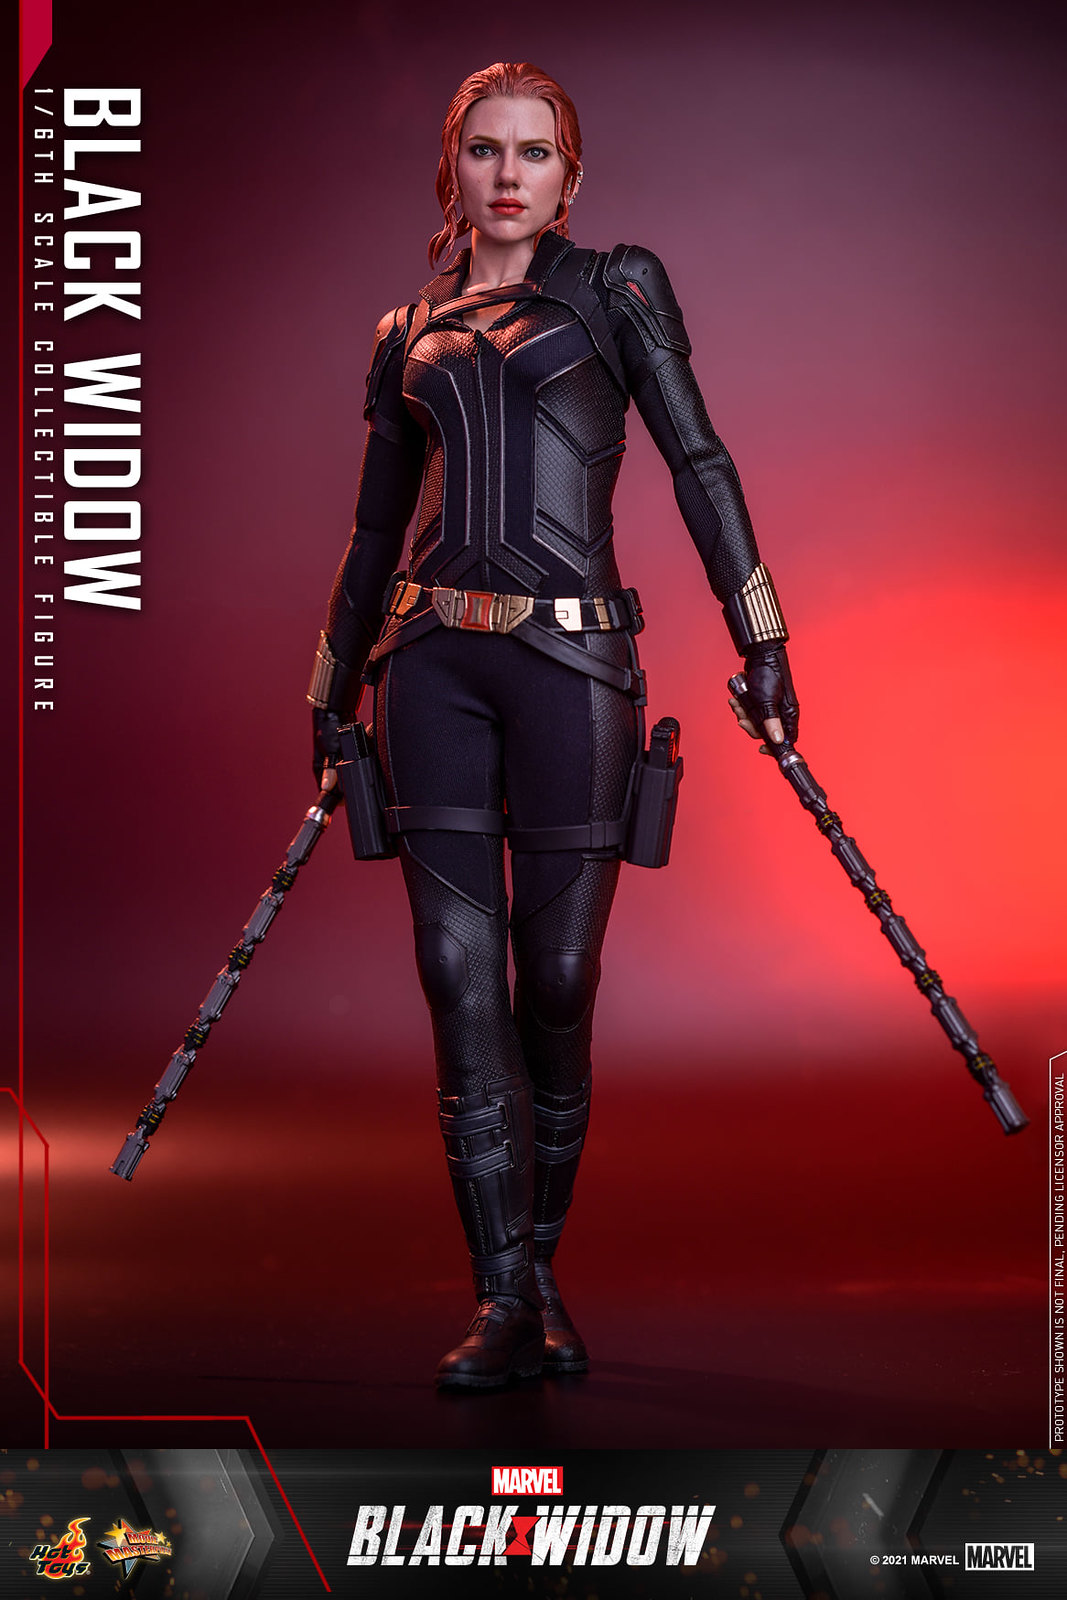 NEW PRODUCT: Hot Toys Black Widow - 1/6th scale Black Widow Collectible Figure 51311278766_91b71b60e0_h